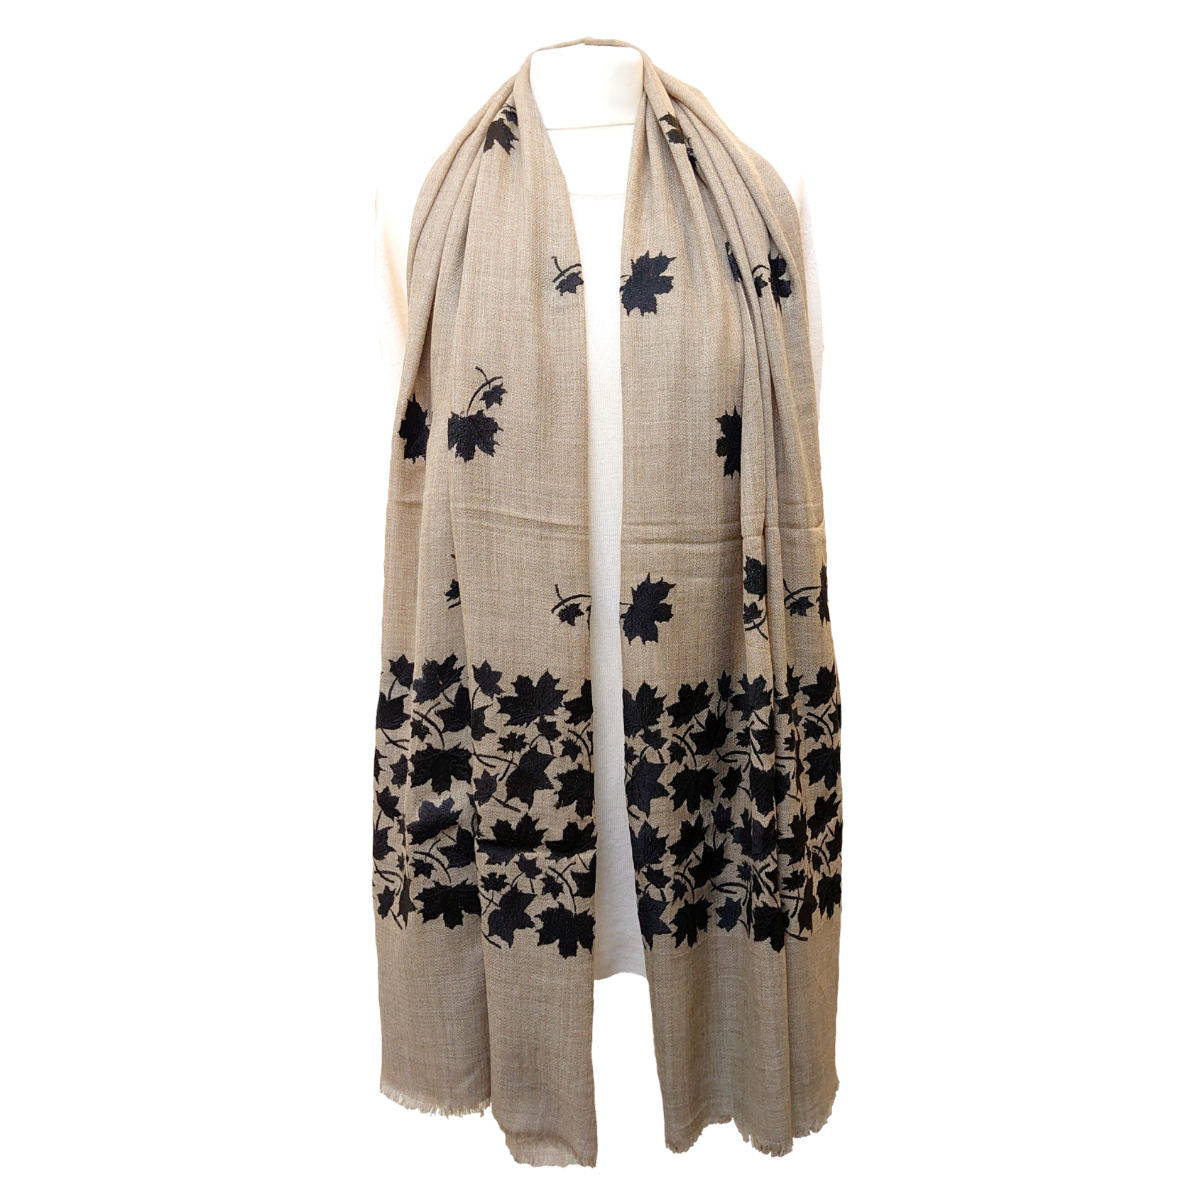 Limited Edition Pashmina Stole With Leaves Embroidery